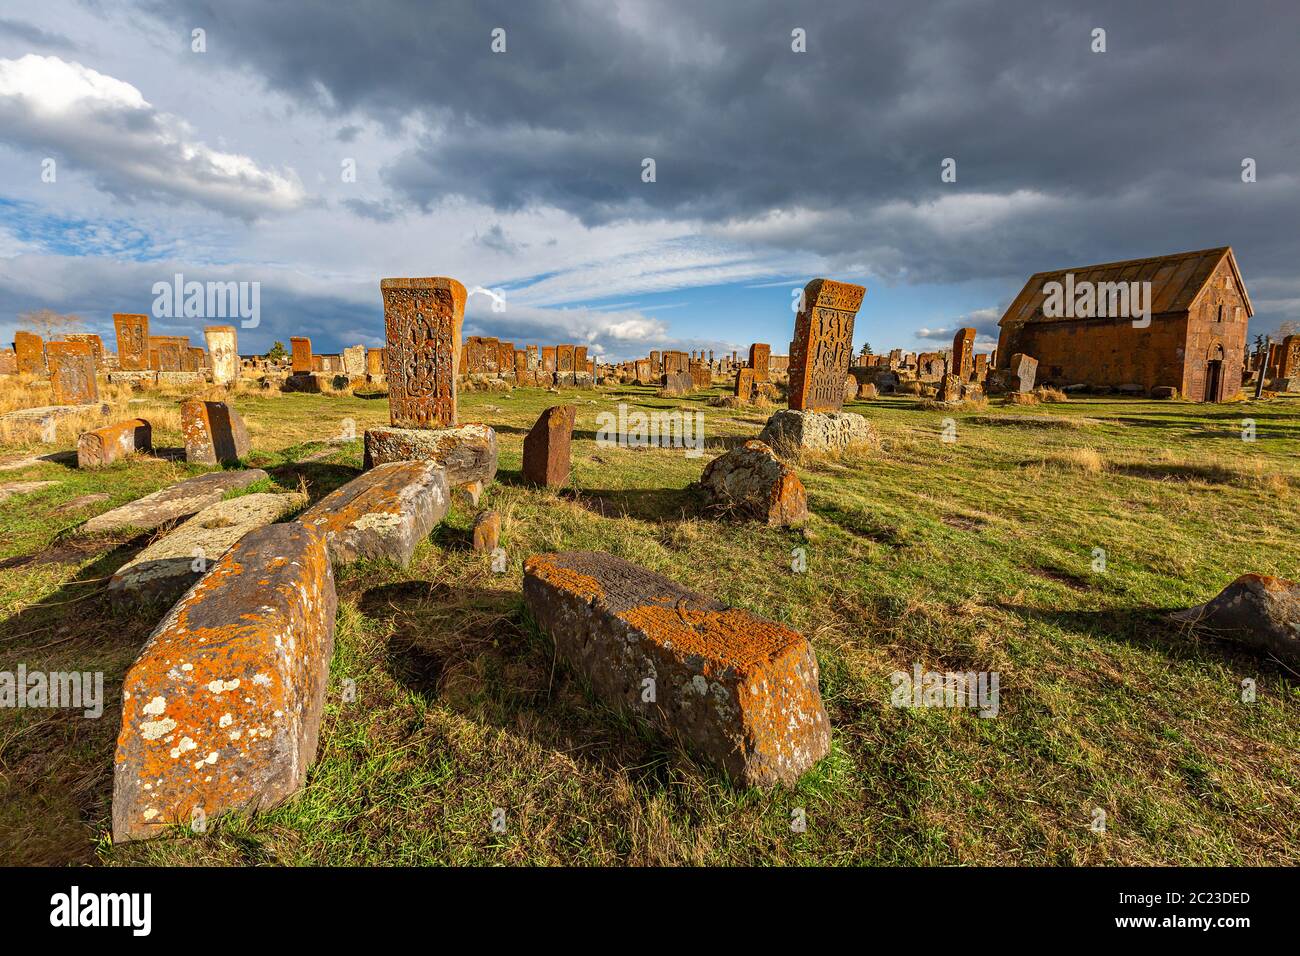 Tombstones known as Kahchkars in the historical cemetery of Noratus in Armenia Stock Photo